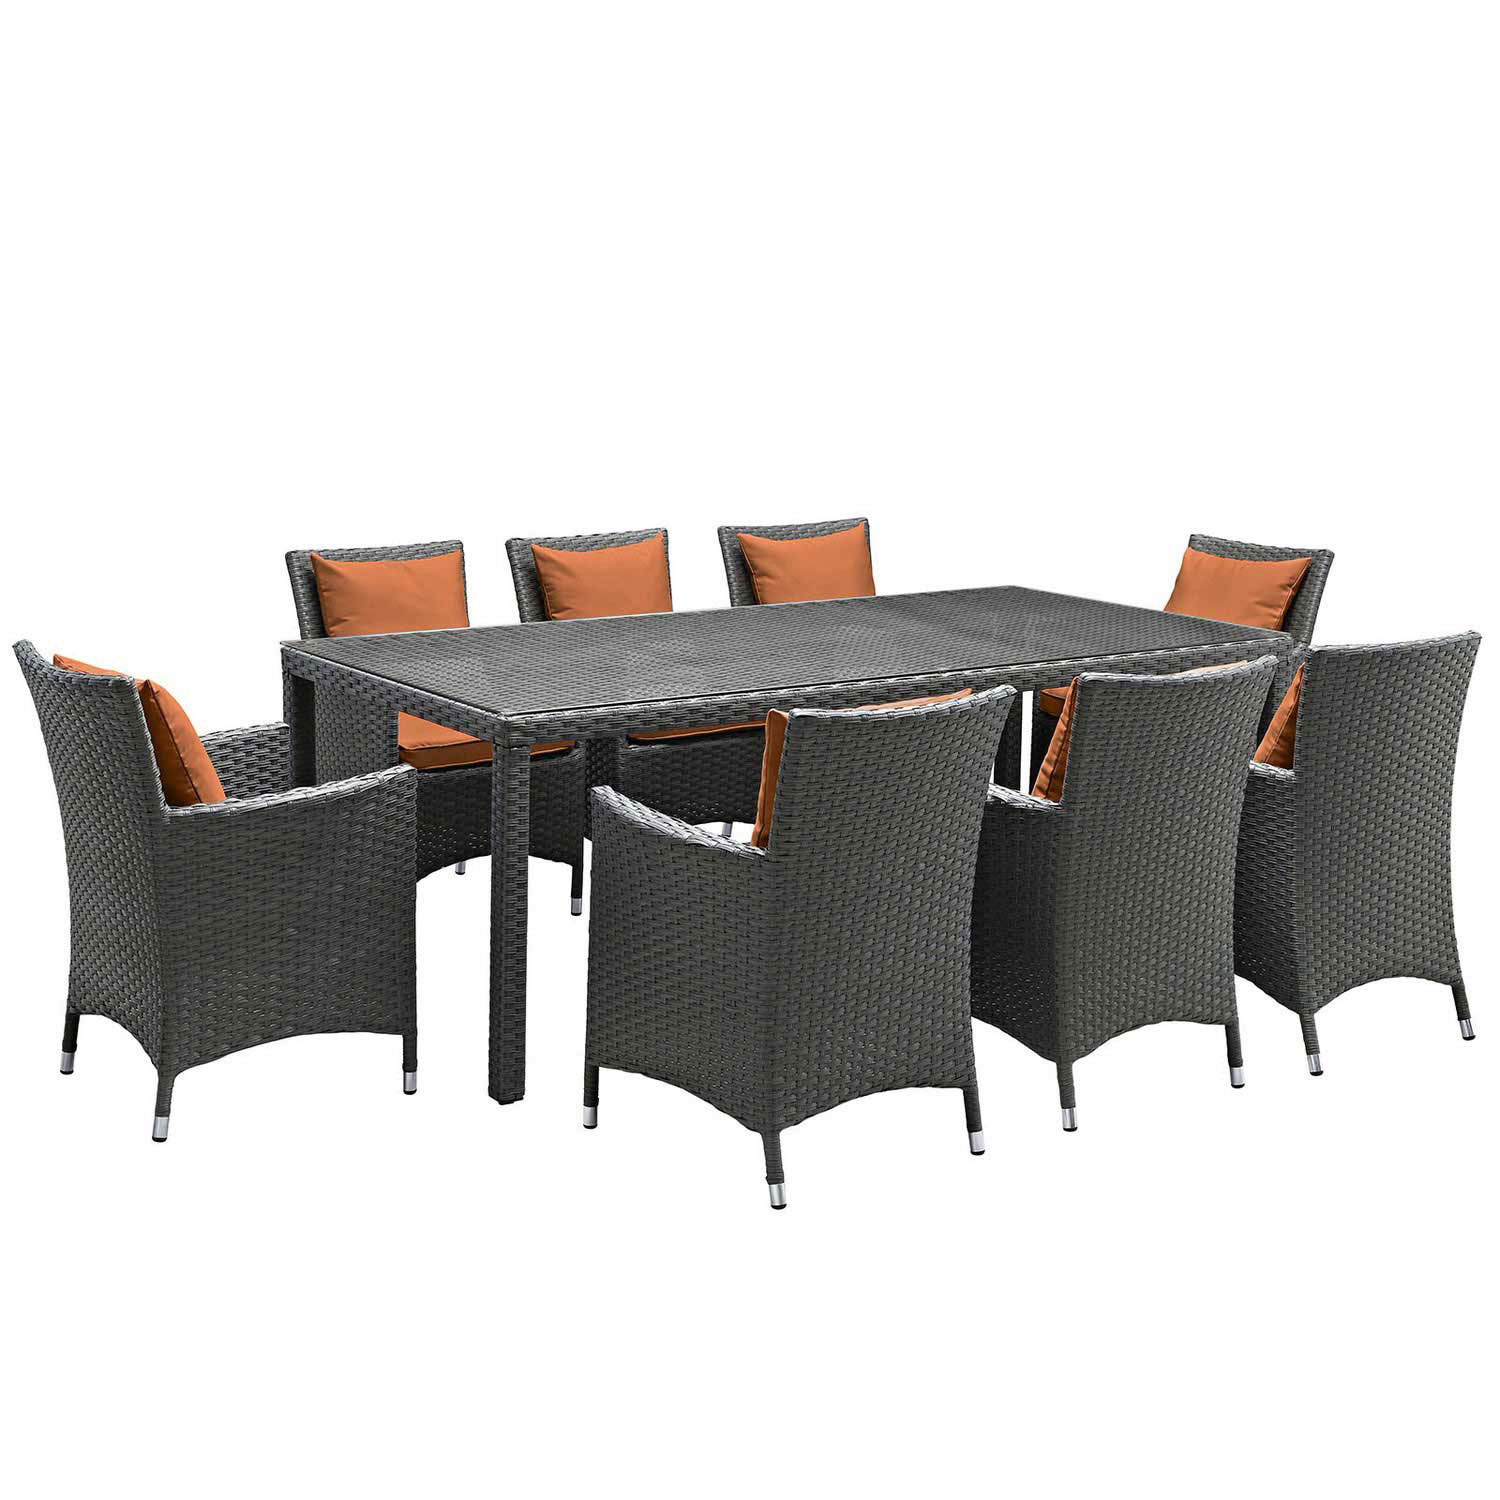 Modway Sojourn 9 Piece Outdoor Patio Sunbrella Dining Set - Canvas Tuscan